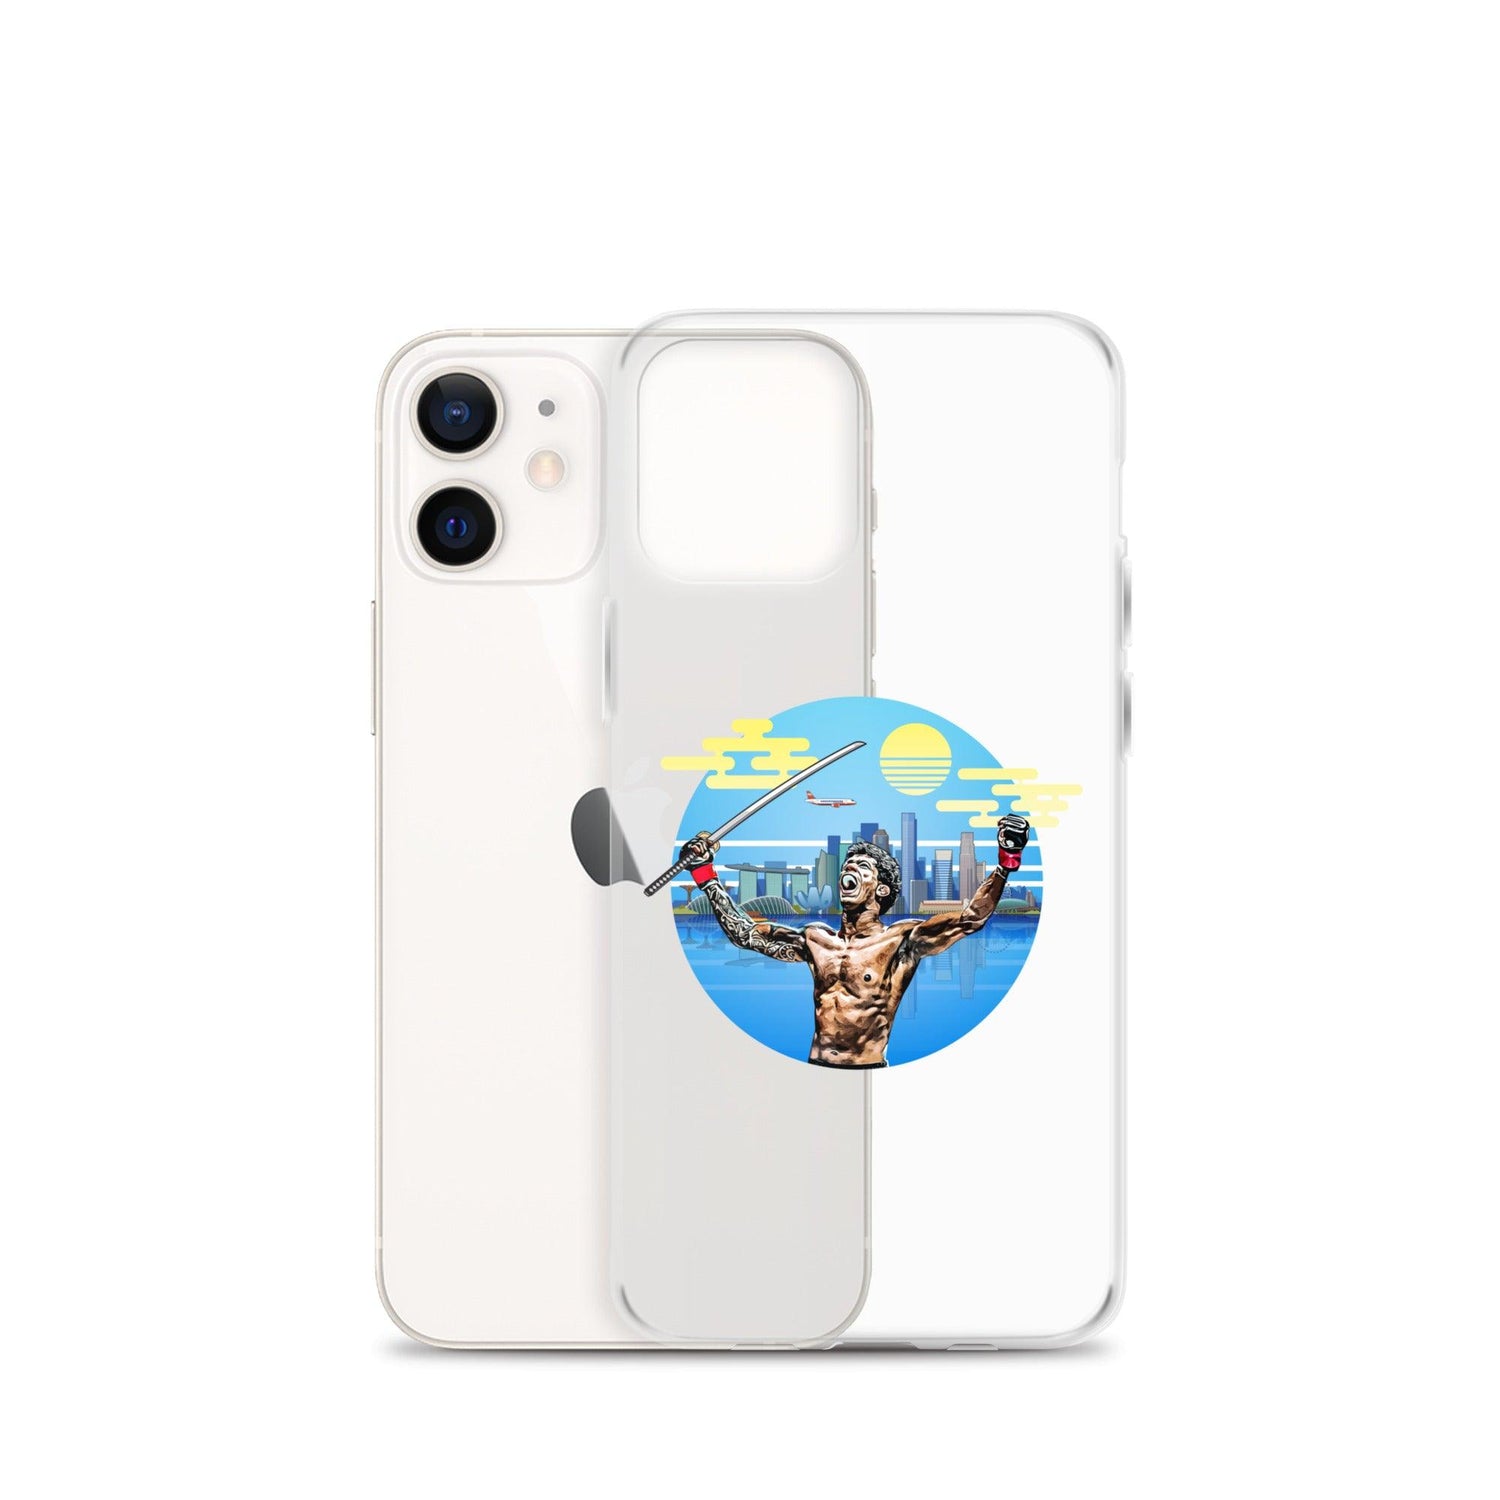 Adriano Moraes "Taking Over" iPhone Case - Fan Arch